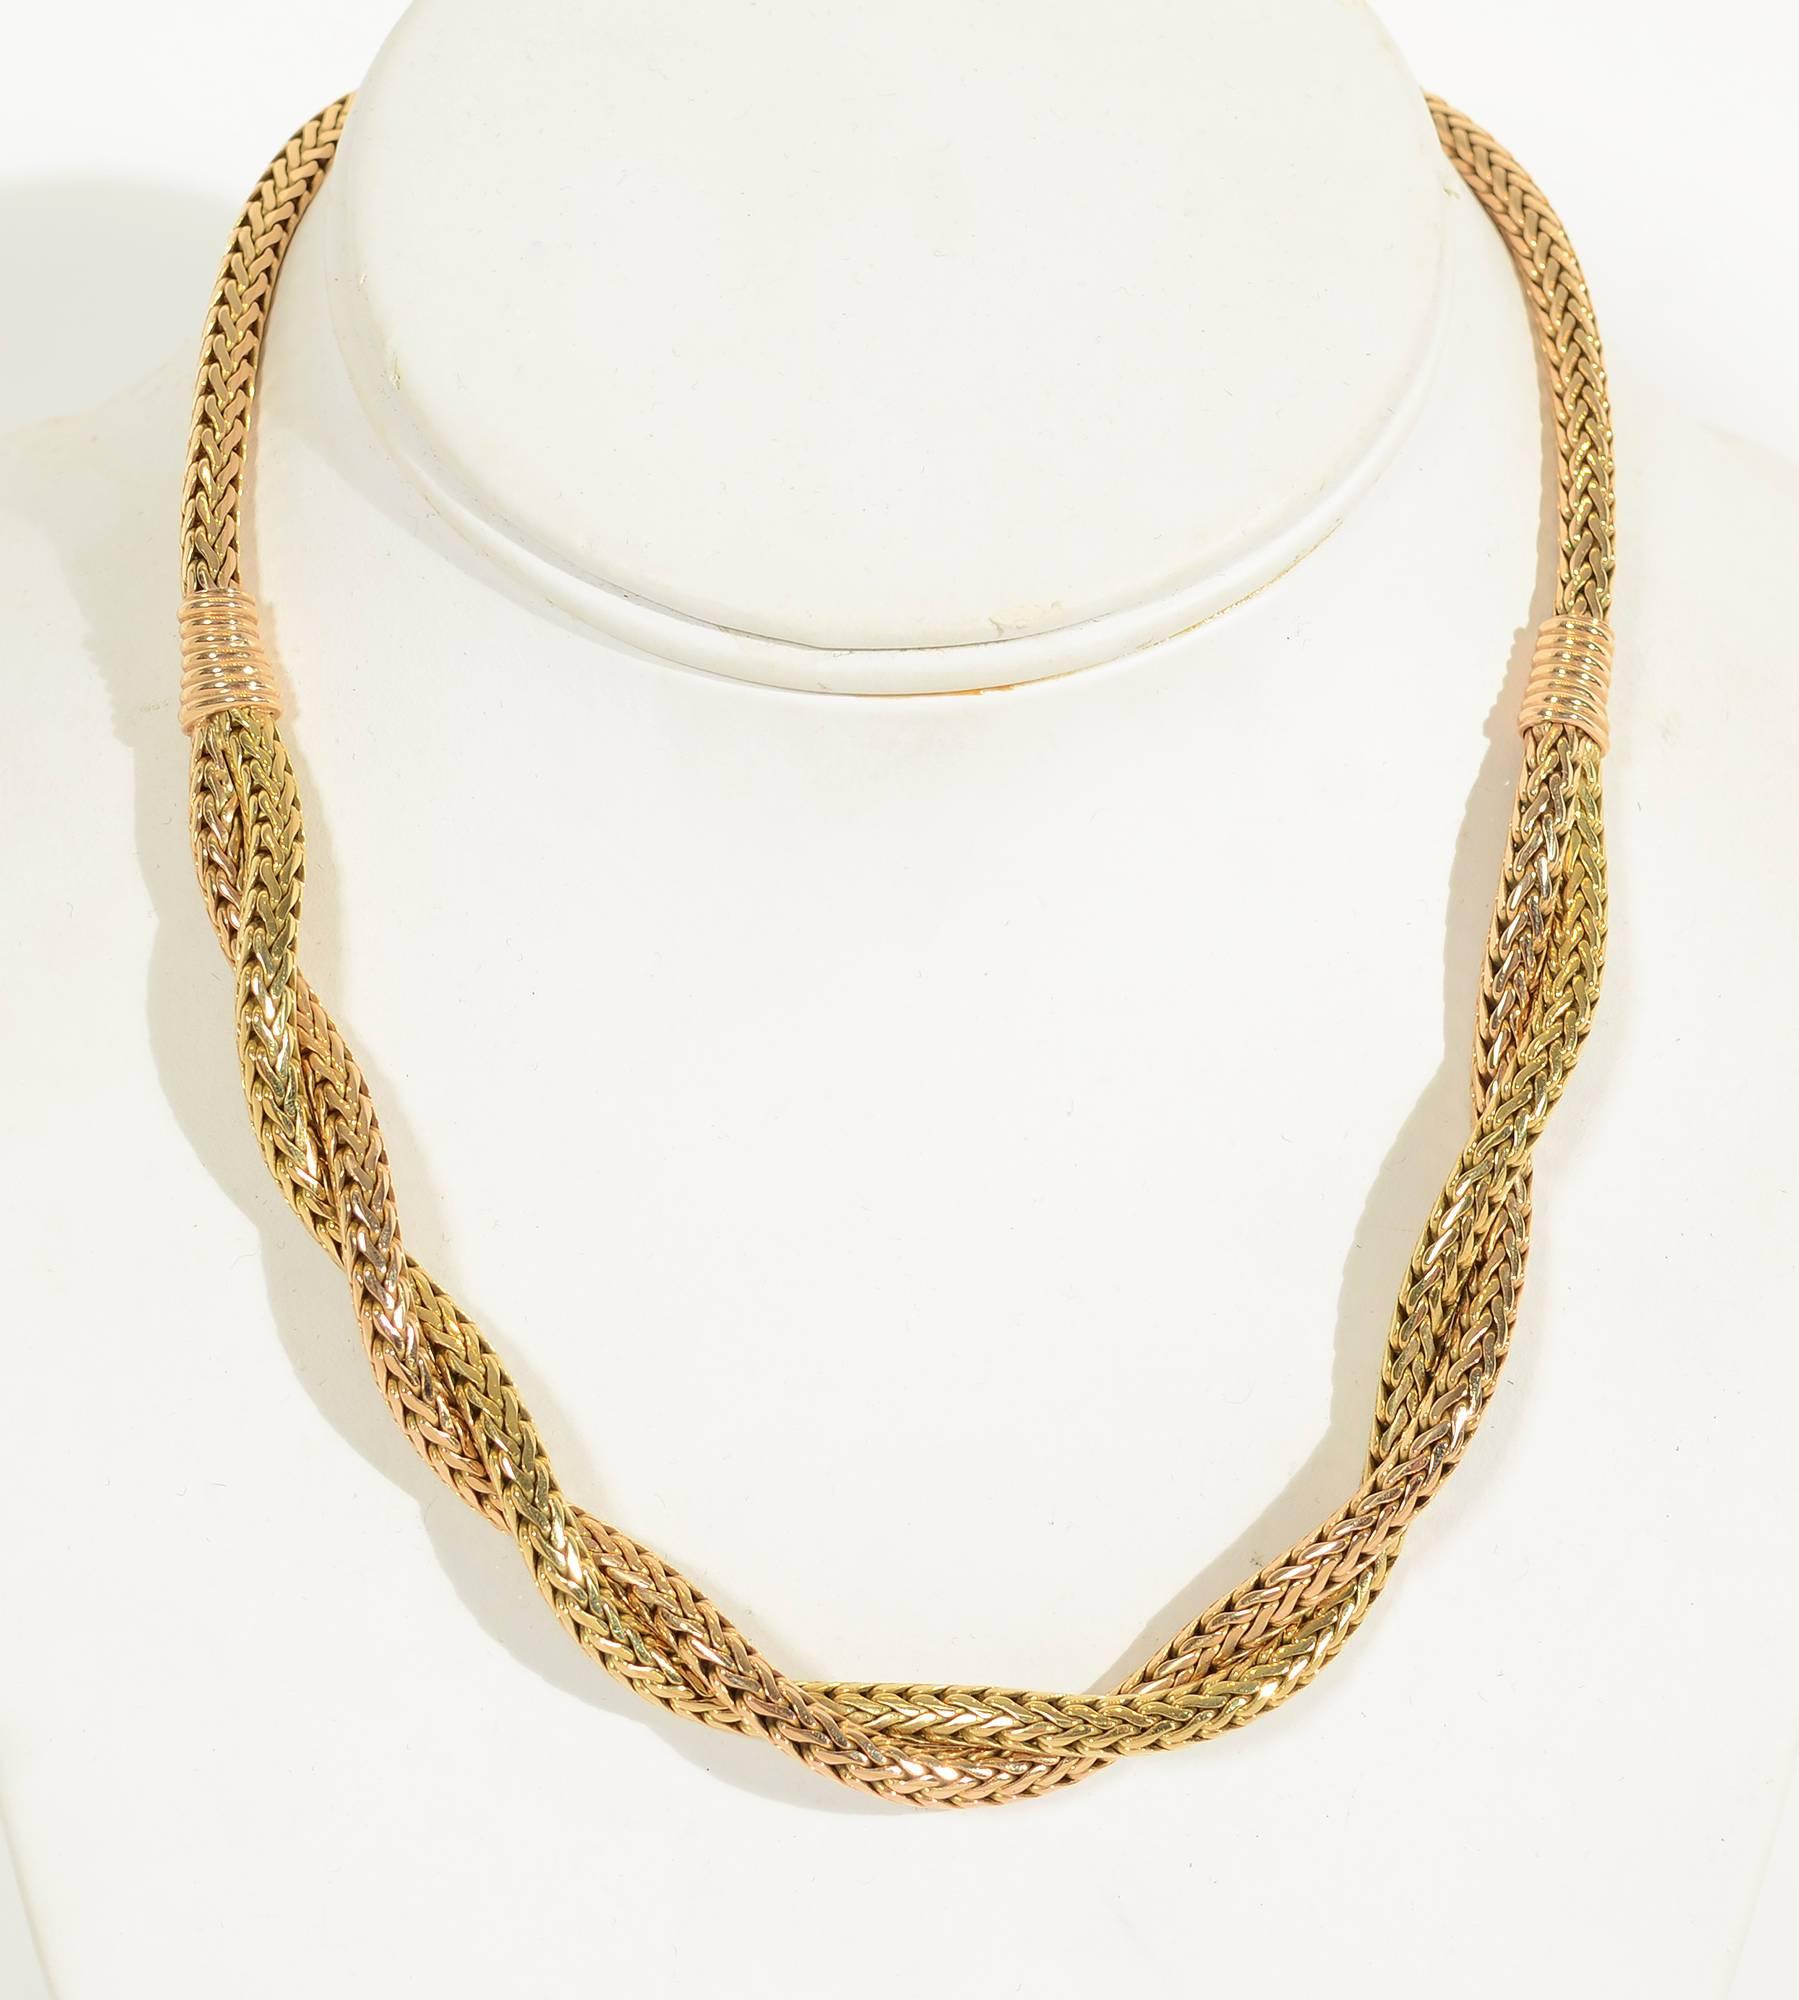 Unusual Retro necklace of pink and yellow gold in a herringbone pattern. The central panel intertwines both colors while the banding and part behind the neck are pink. The difference in the two colors is subtle but evident. The necklace measures 16